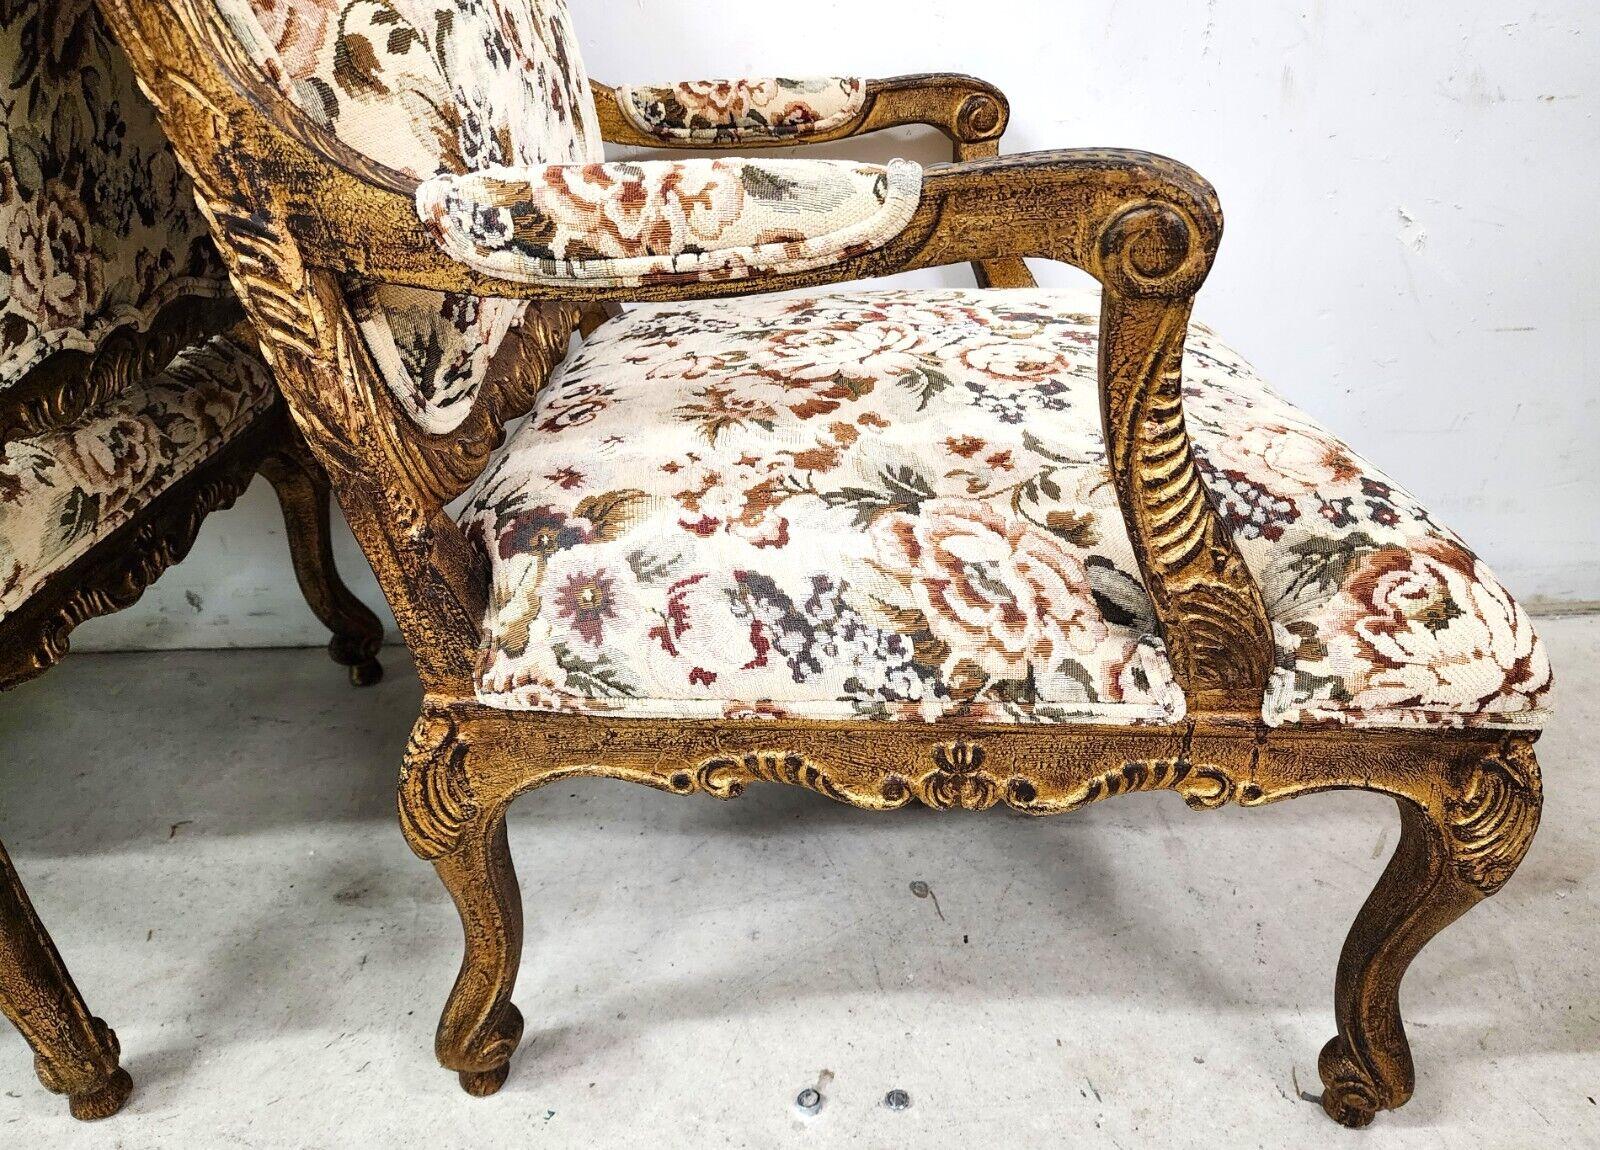 French Louis XV Rococo Giltwood Fauteuil Oversized Armchairs - a Pair For Sale 5